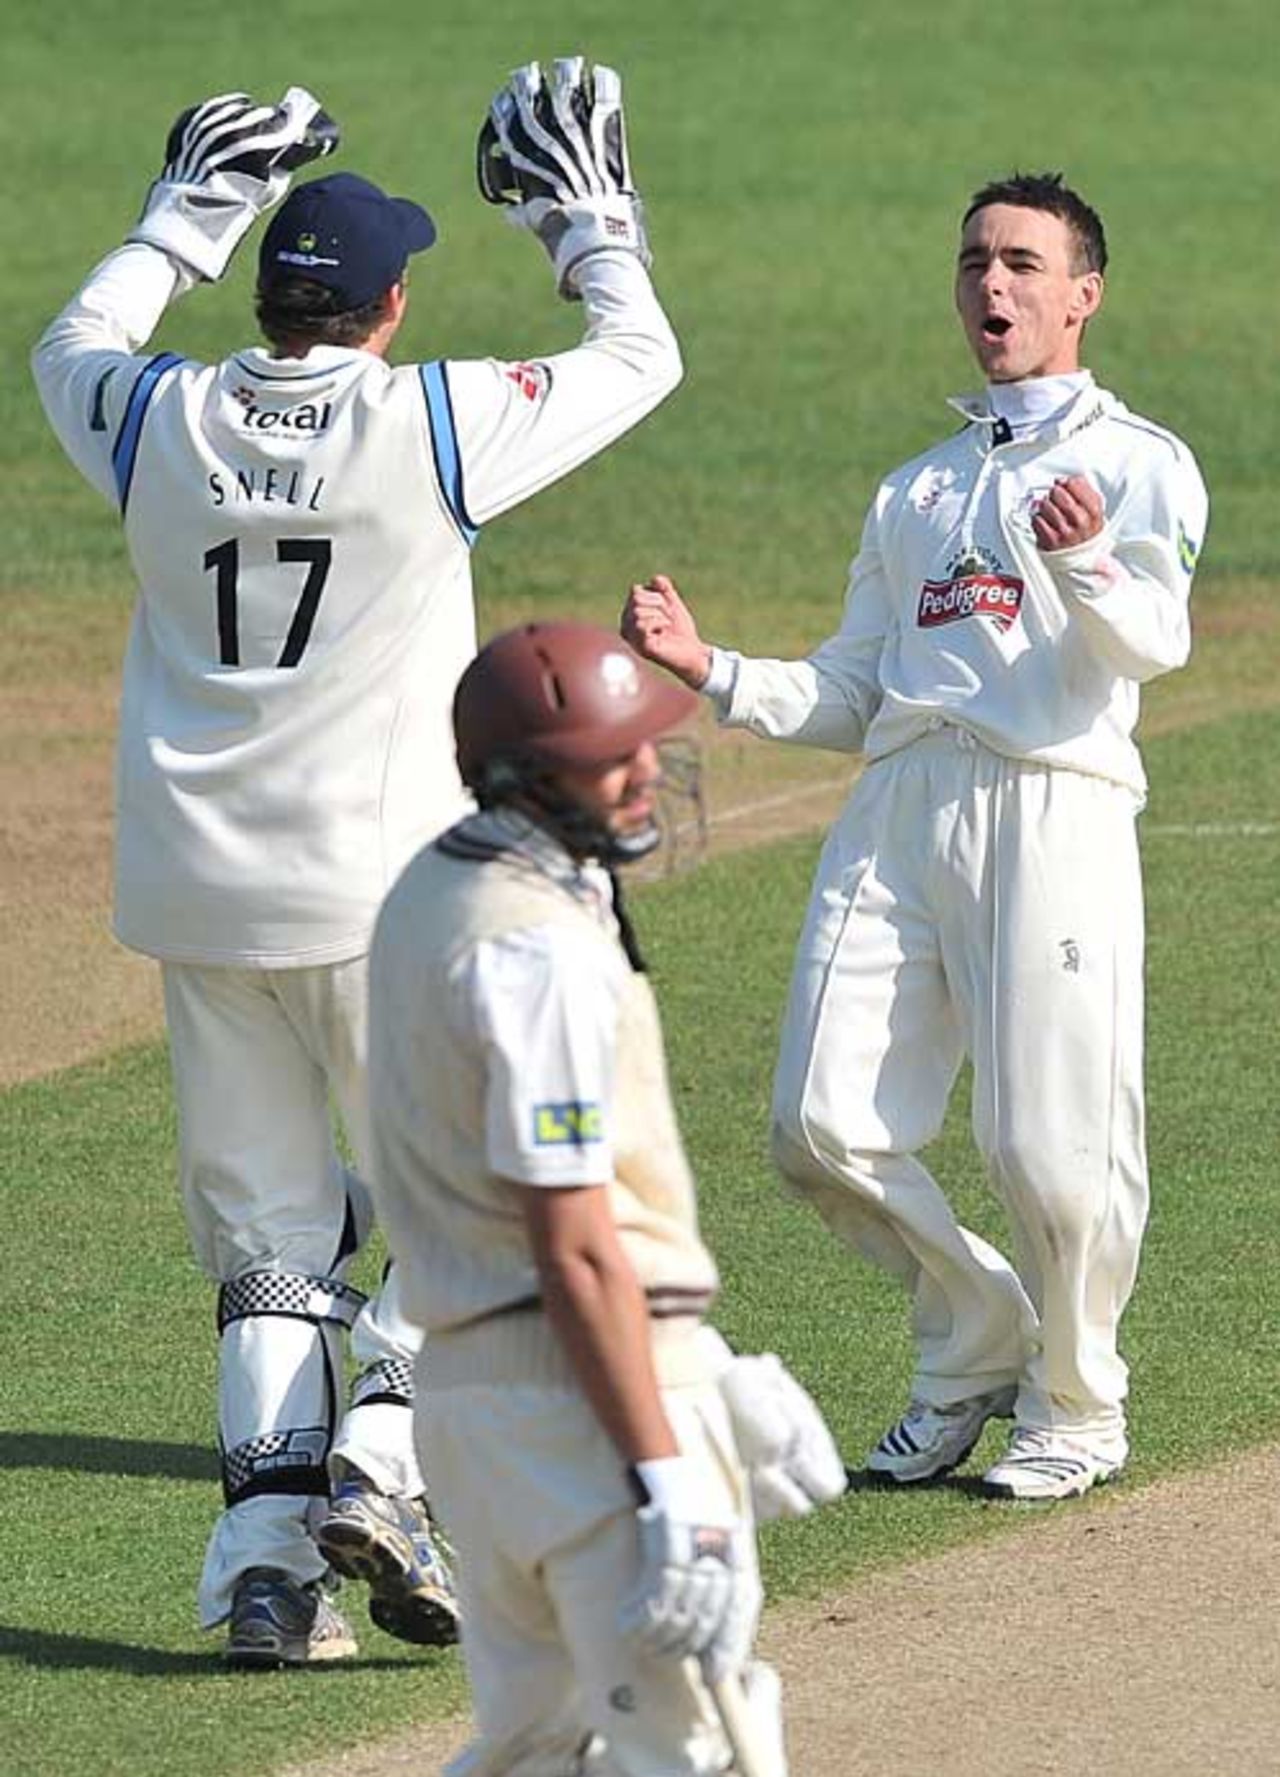 Chris Taylor is thrilled to snap up Matthew Spriegel, Surrey v Gloucestershire, County Championship Division Two, The Oval, April 18, 2009